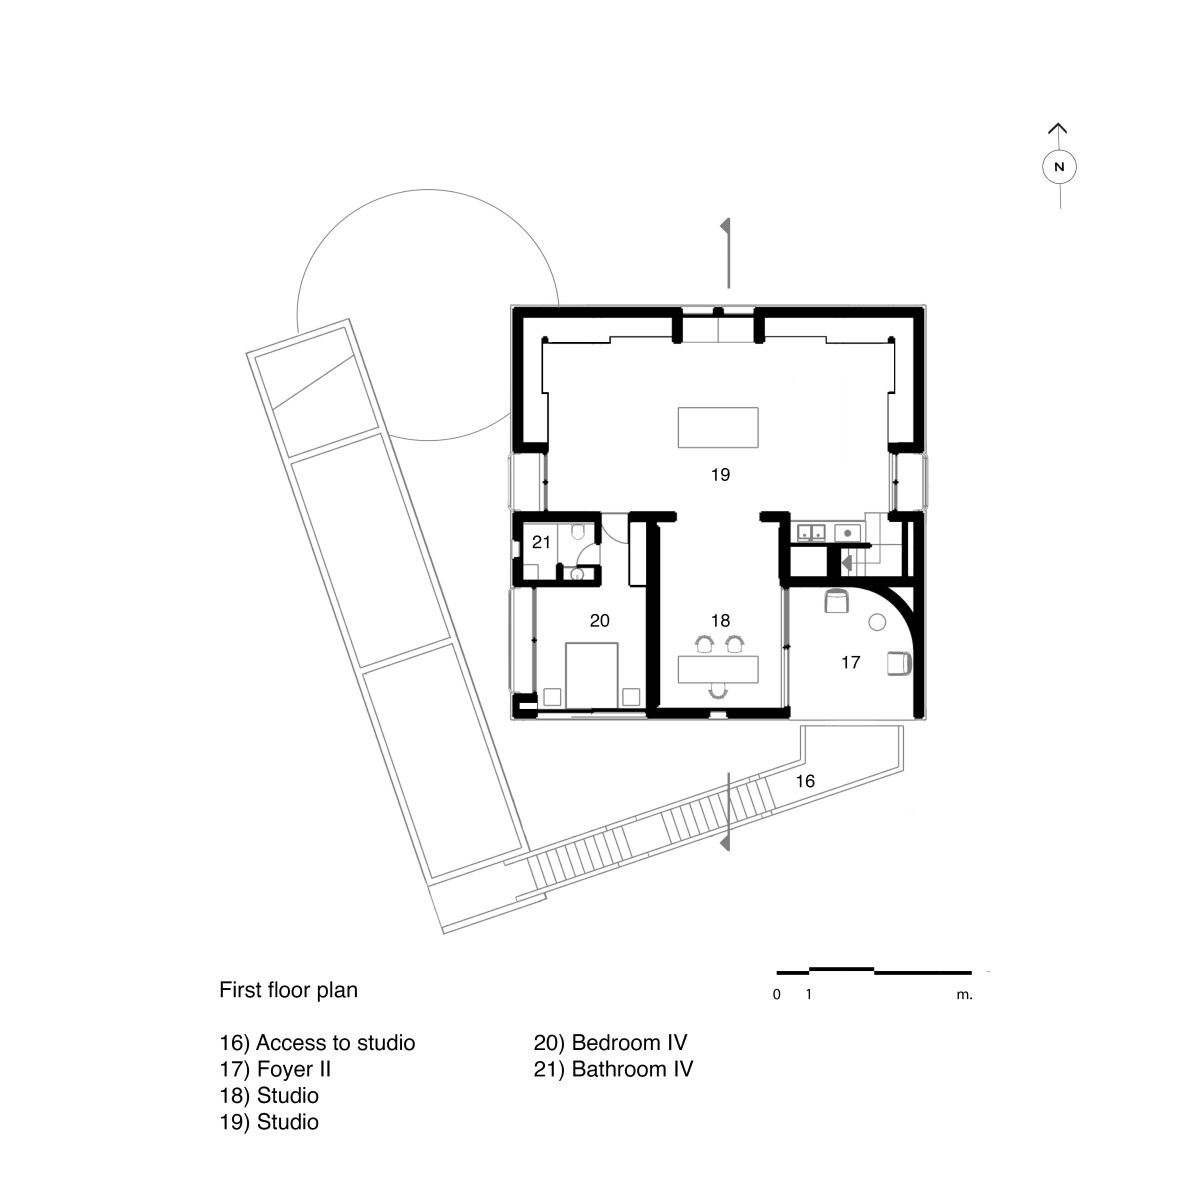 First floor plan of Artist Residence & Atelier by Cochin Creative Collective